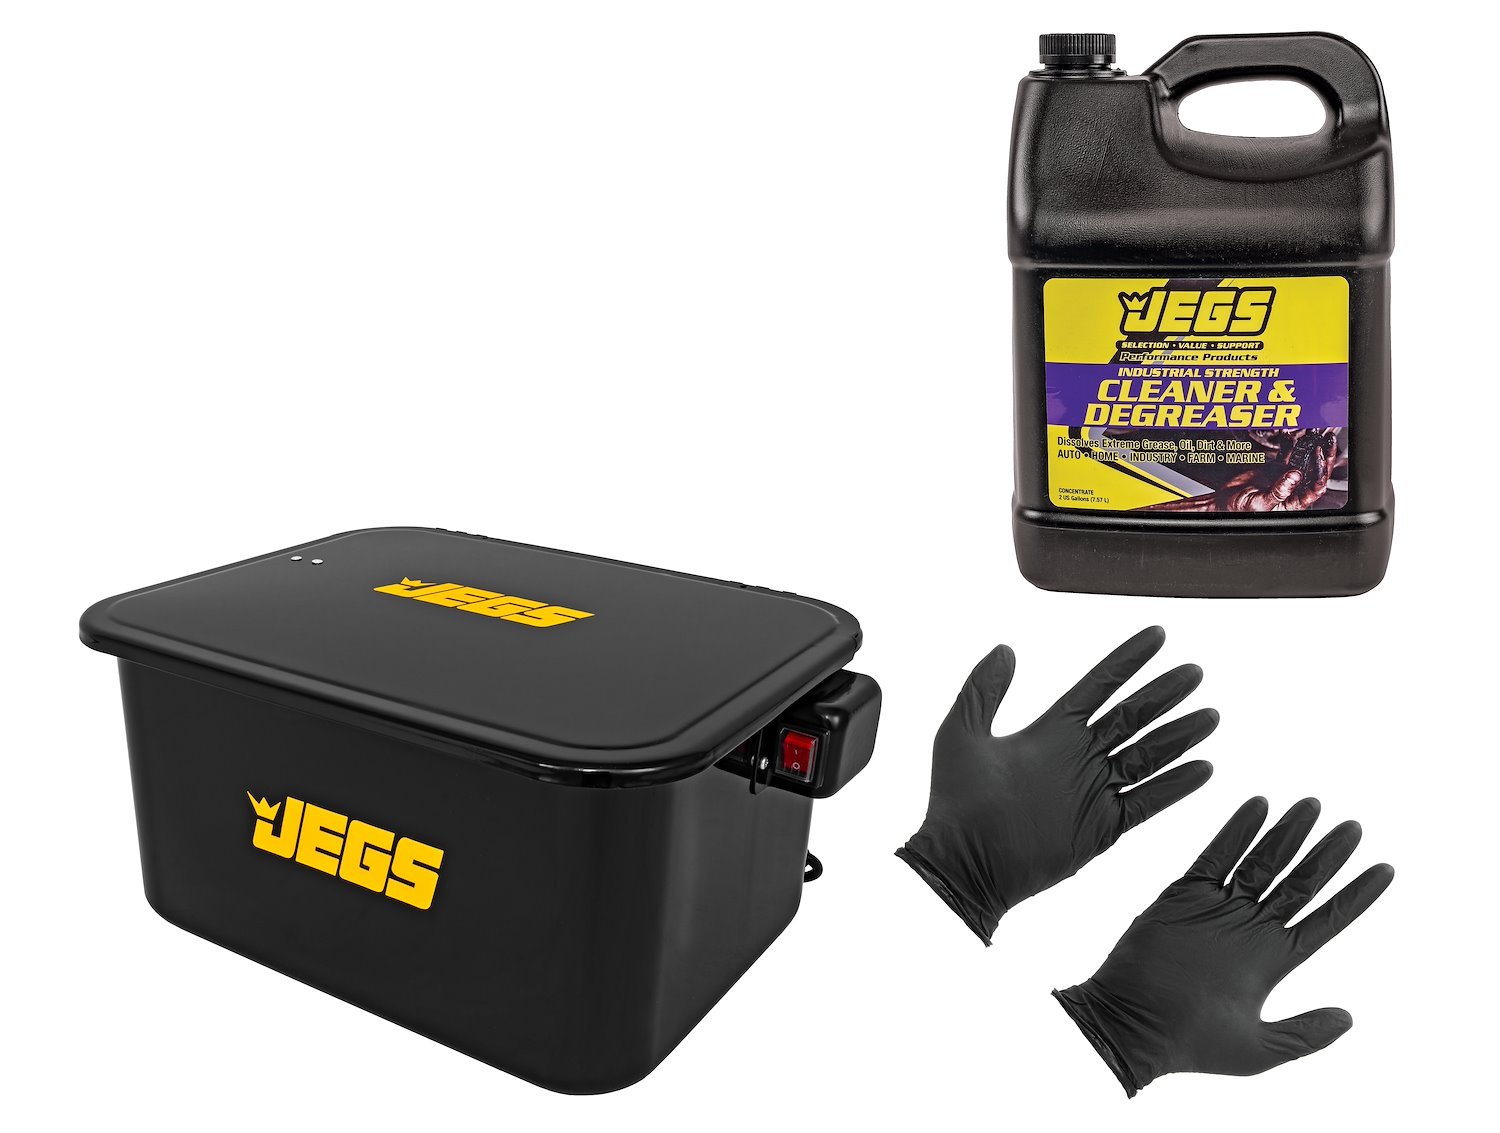 Portable Parts Washer Kit with 1 Two Gallon Bottle of Cleaner/Degreaser & Large Gloves [5-Gallon Tank]